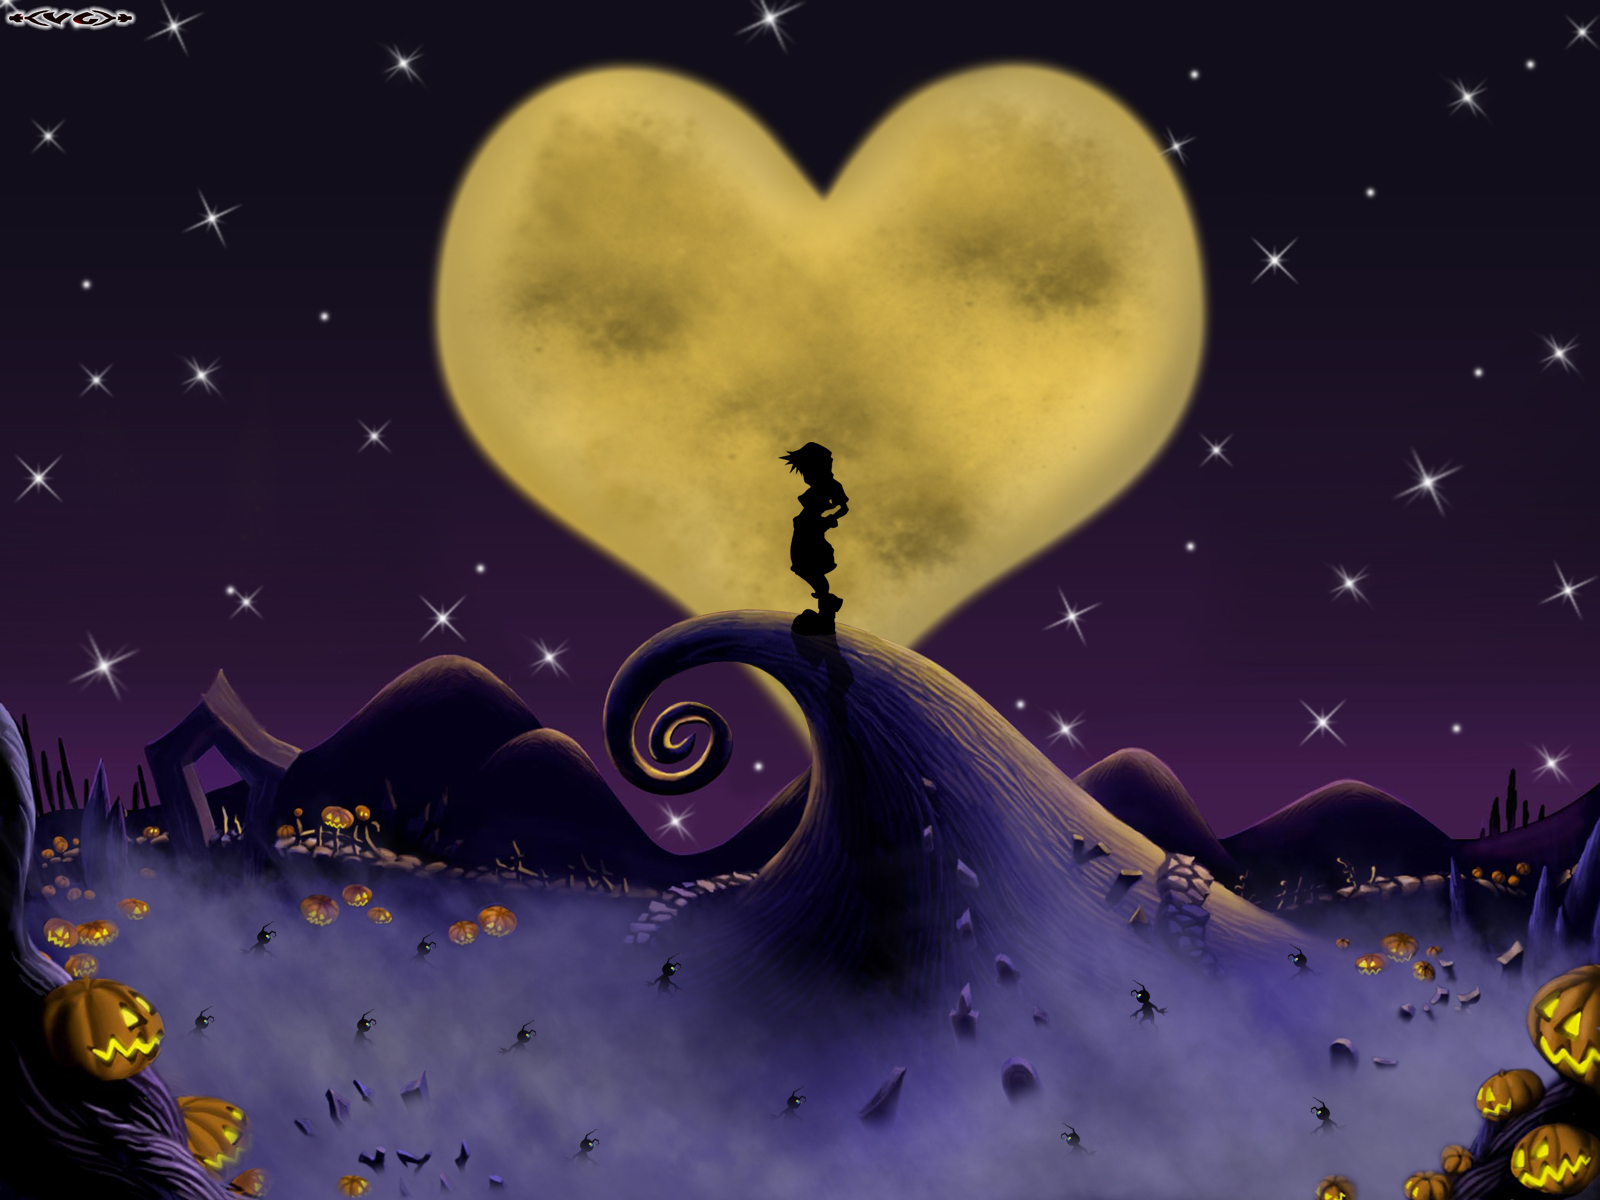 Sora (Kingdom Hearts) character in The Nightmare Before Christmas-themed HD desktop wallpaper.